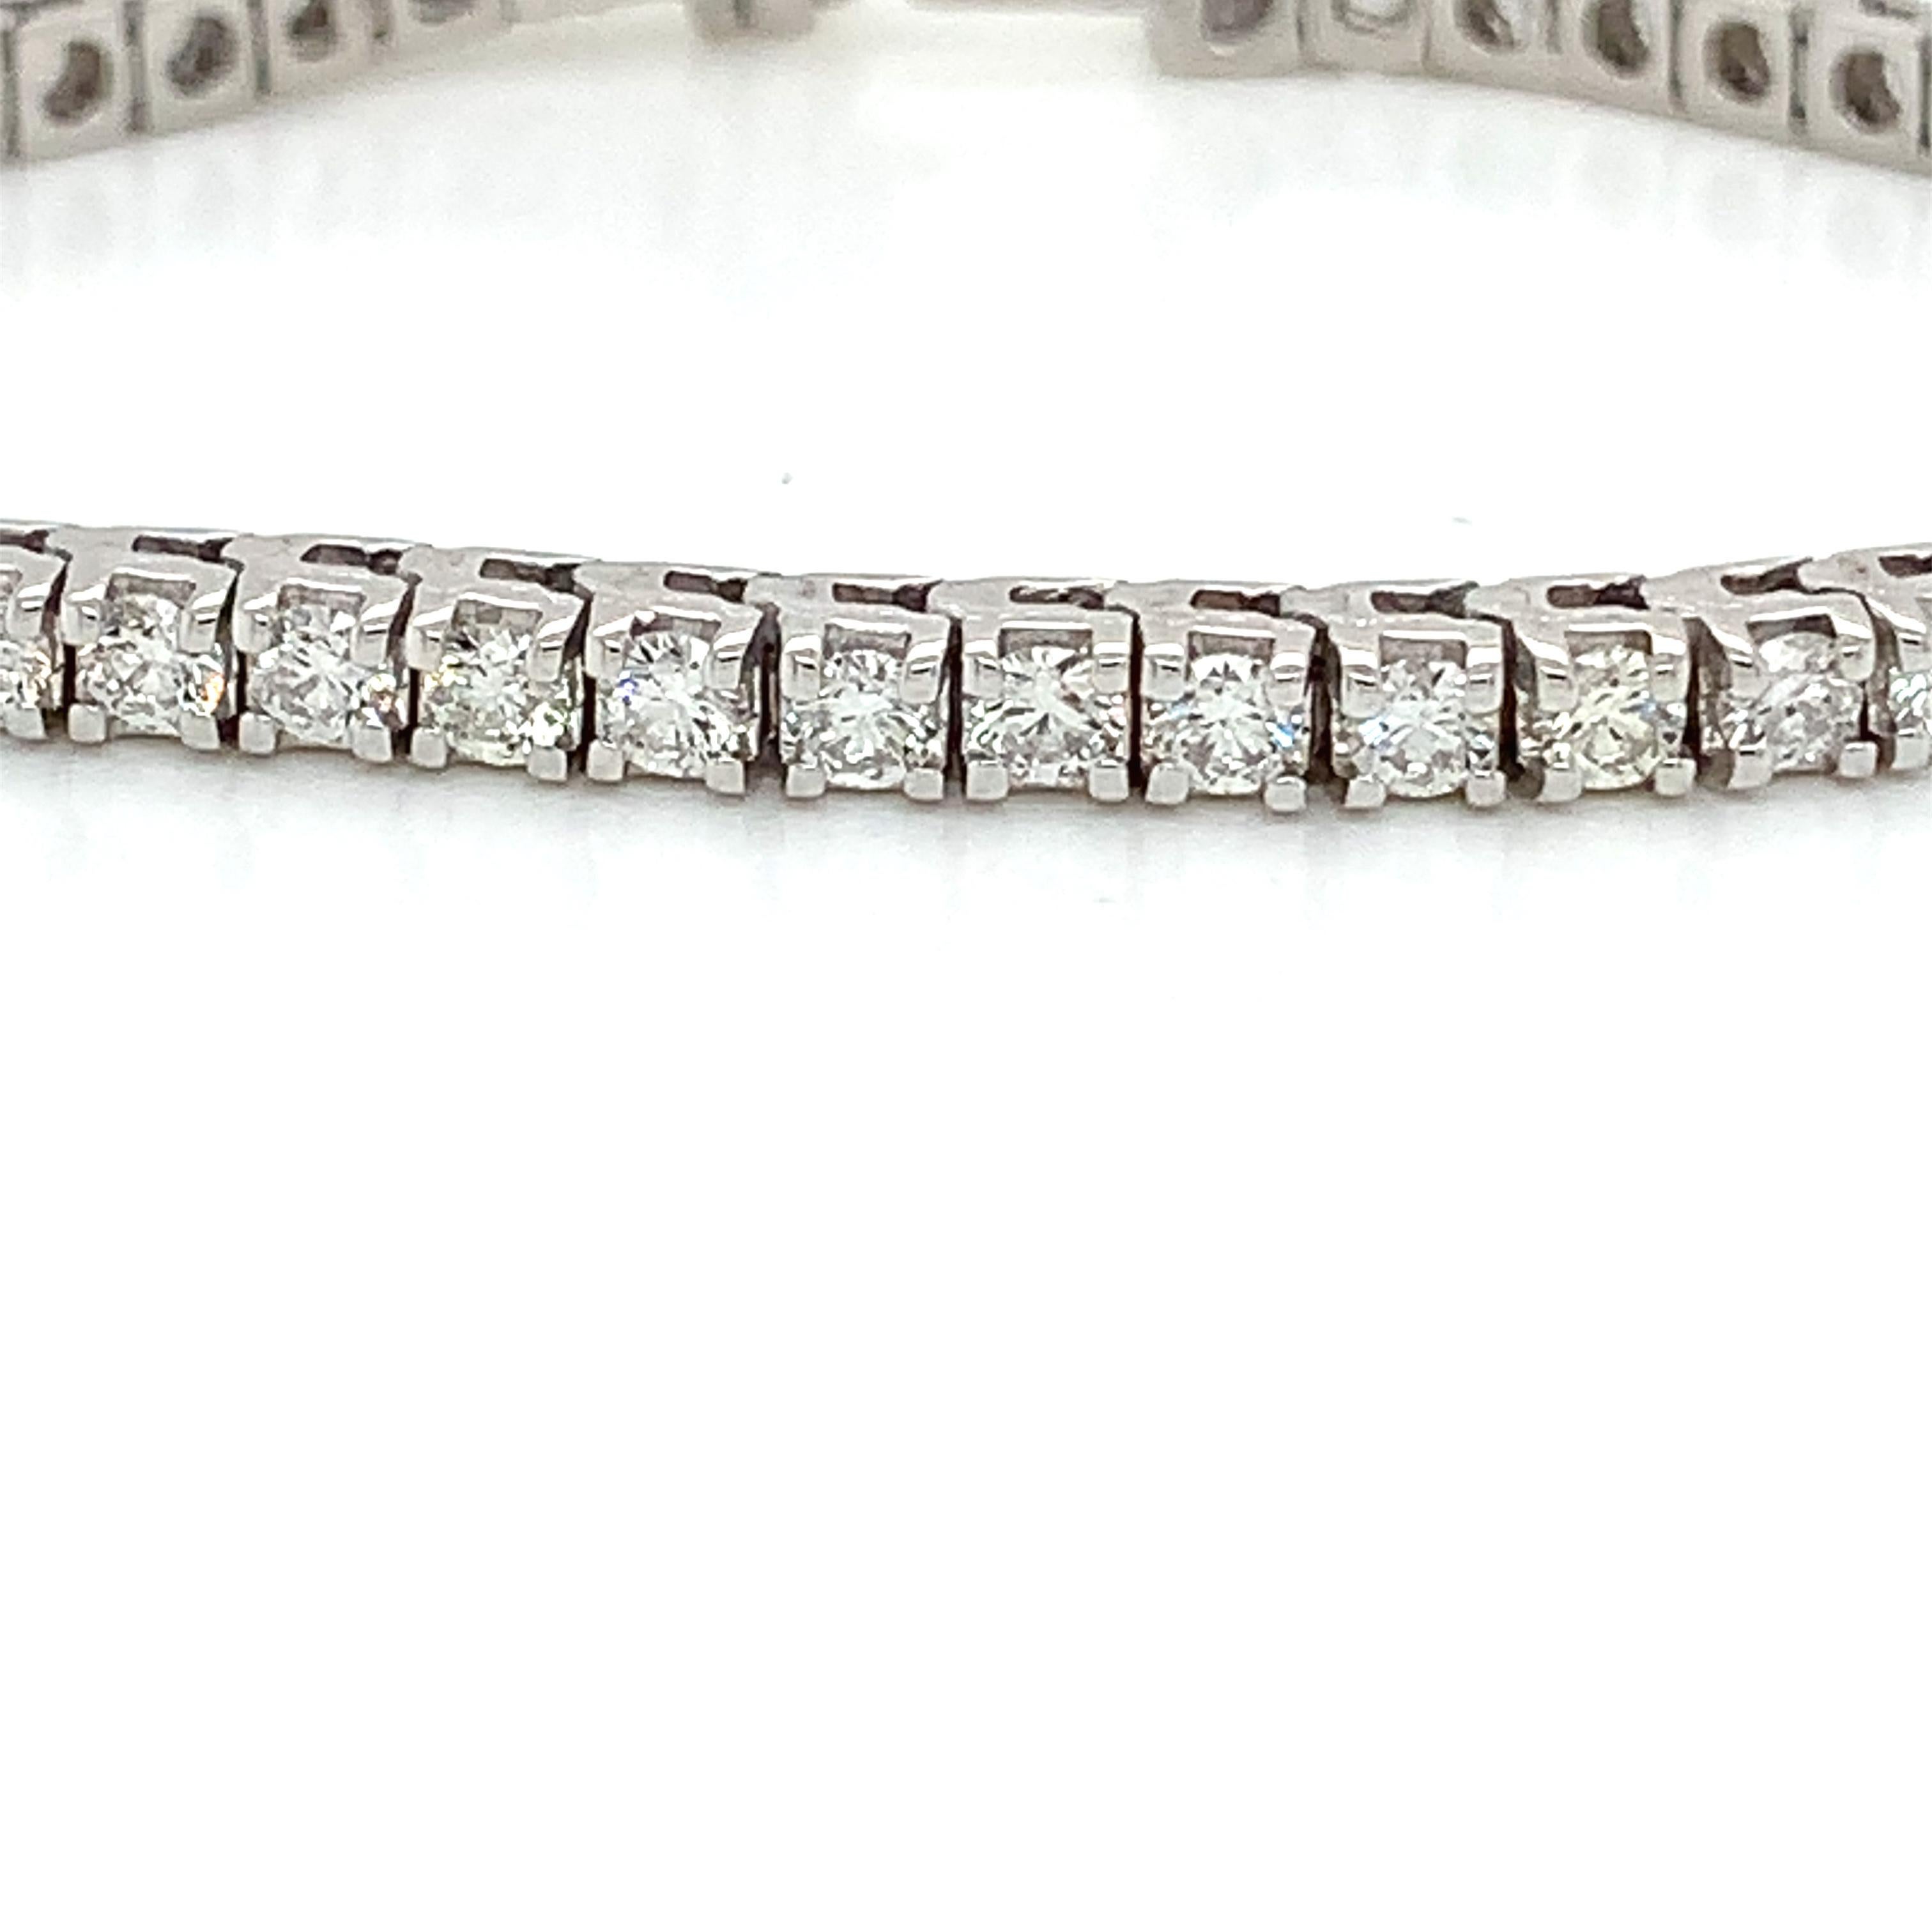 5.00 ct Diamond Tennis Bracelet
Color: GH
Clarity: SI
50 total diamonds
Set in 14k white gold
Size is 7 inches
